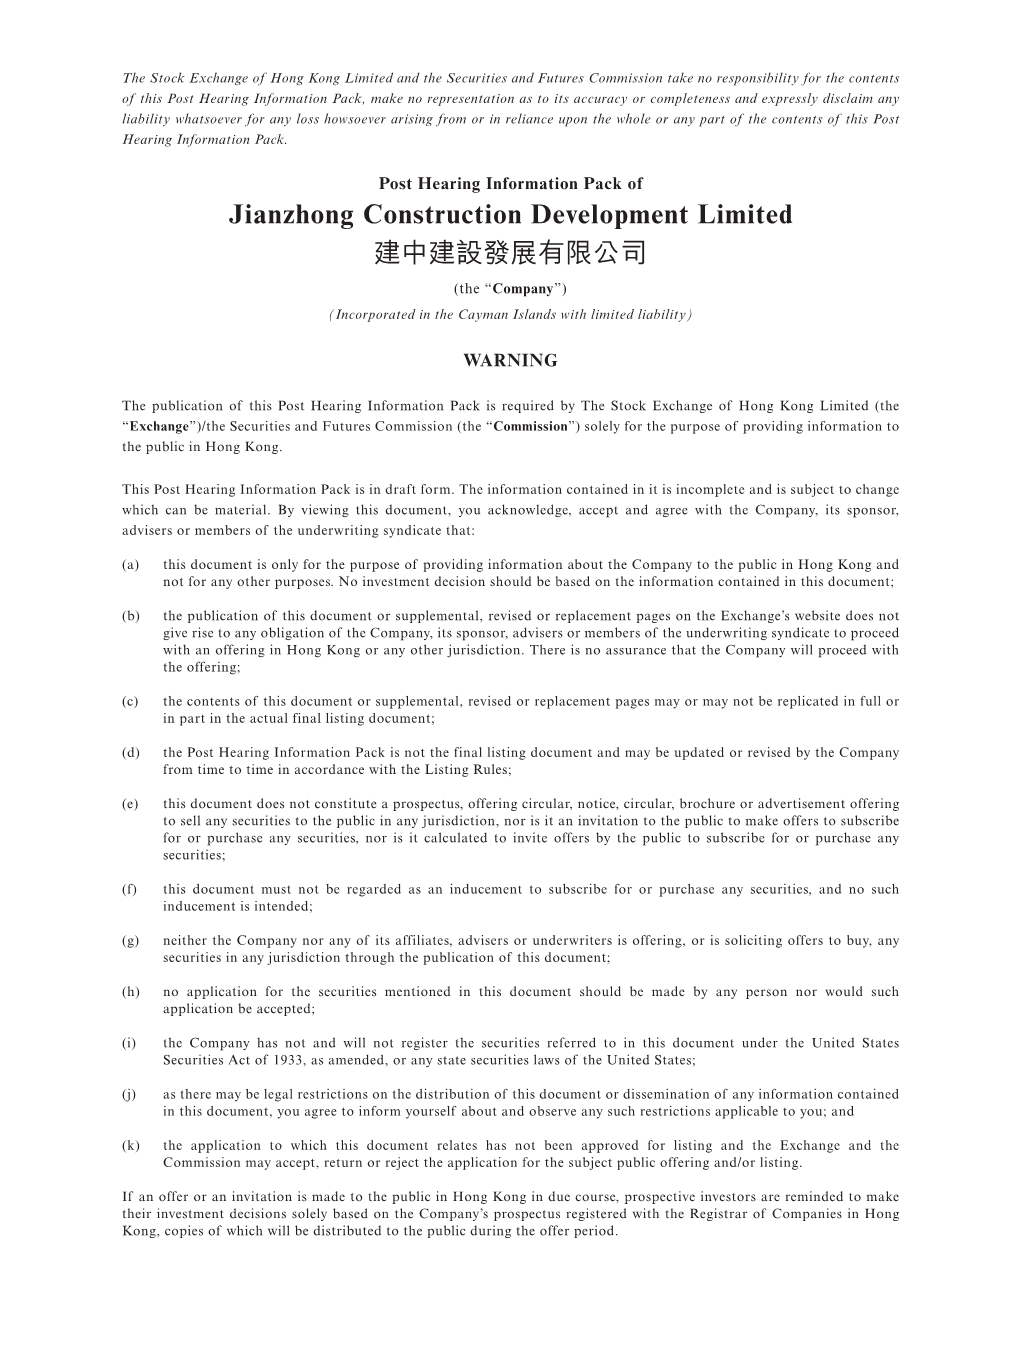 Jianzhong Construction Development Limited 建中建設發展有限公司 (The “Company”) (Incorporated in the Cayman Islands with Limited Liability)